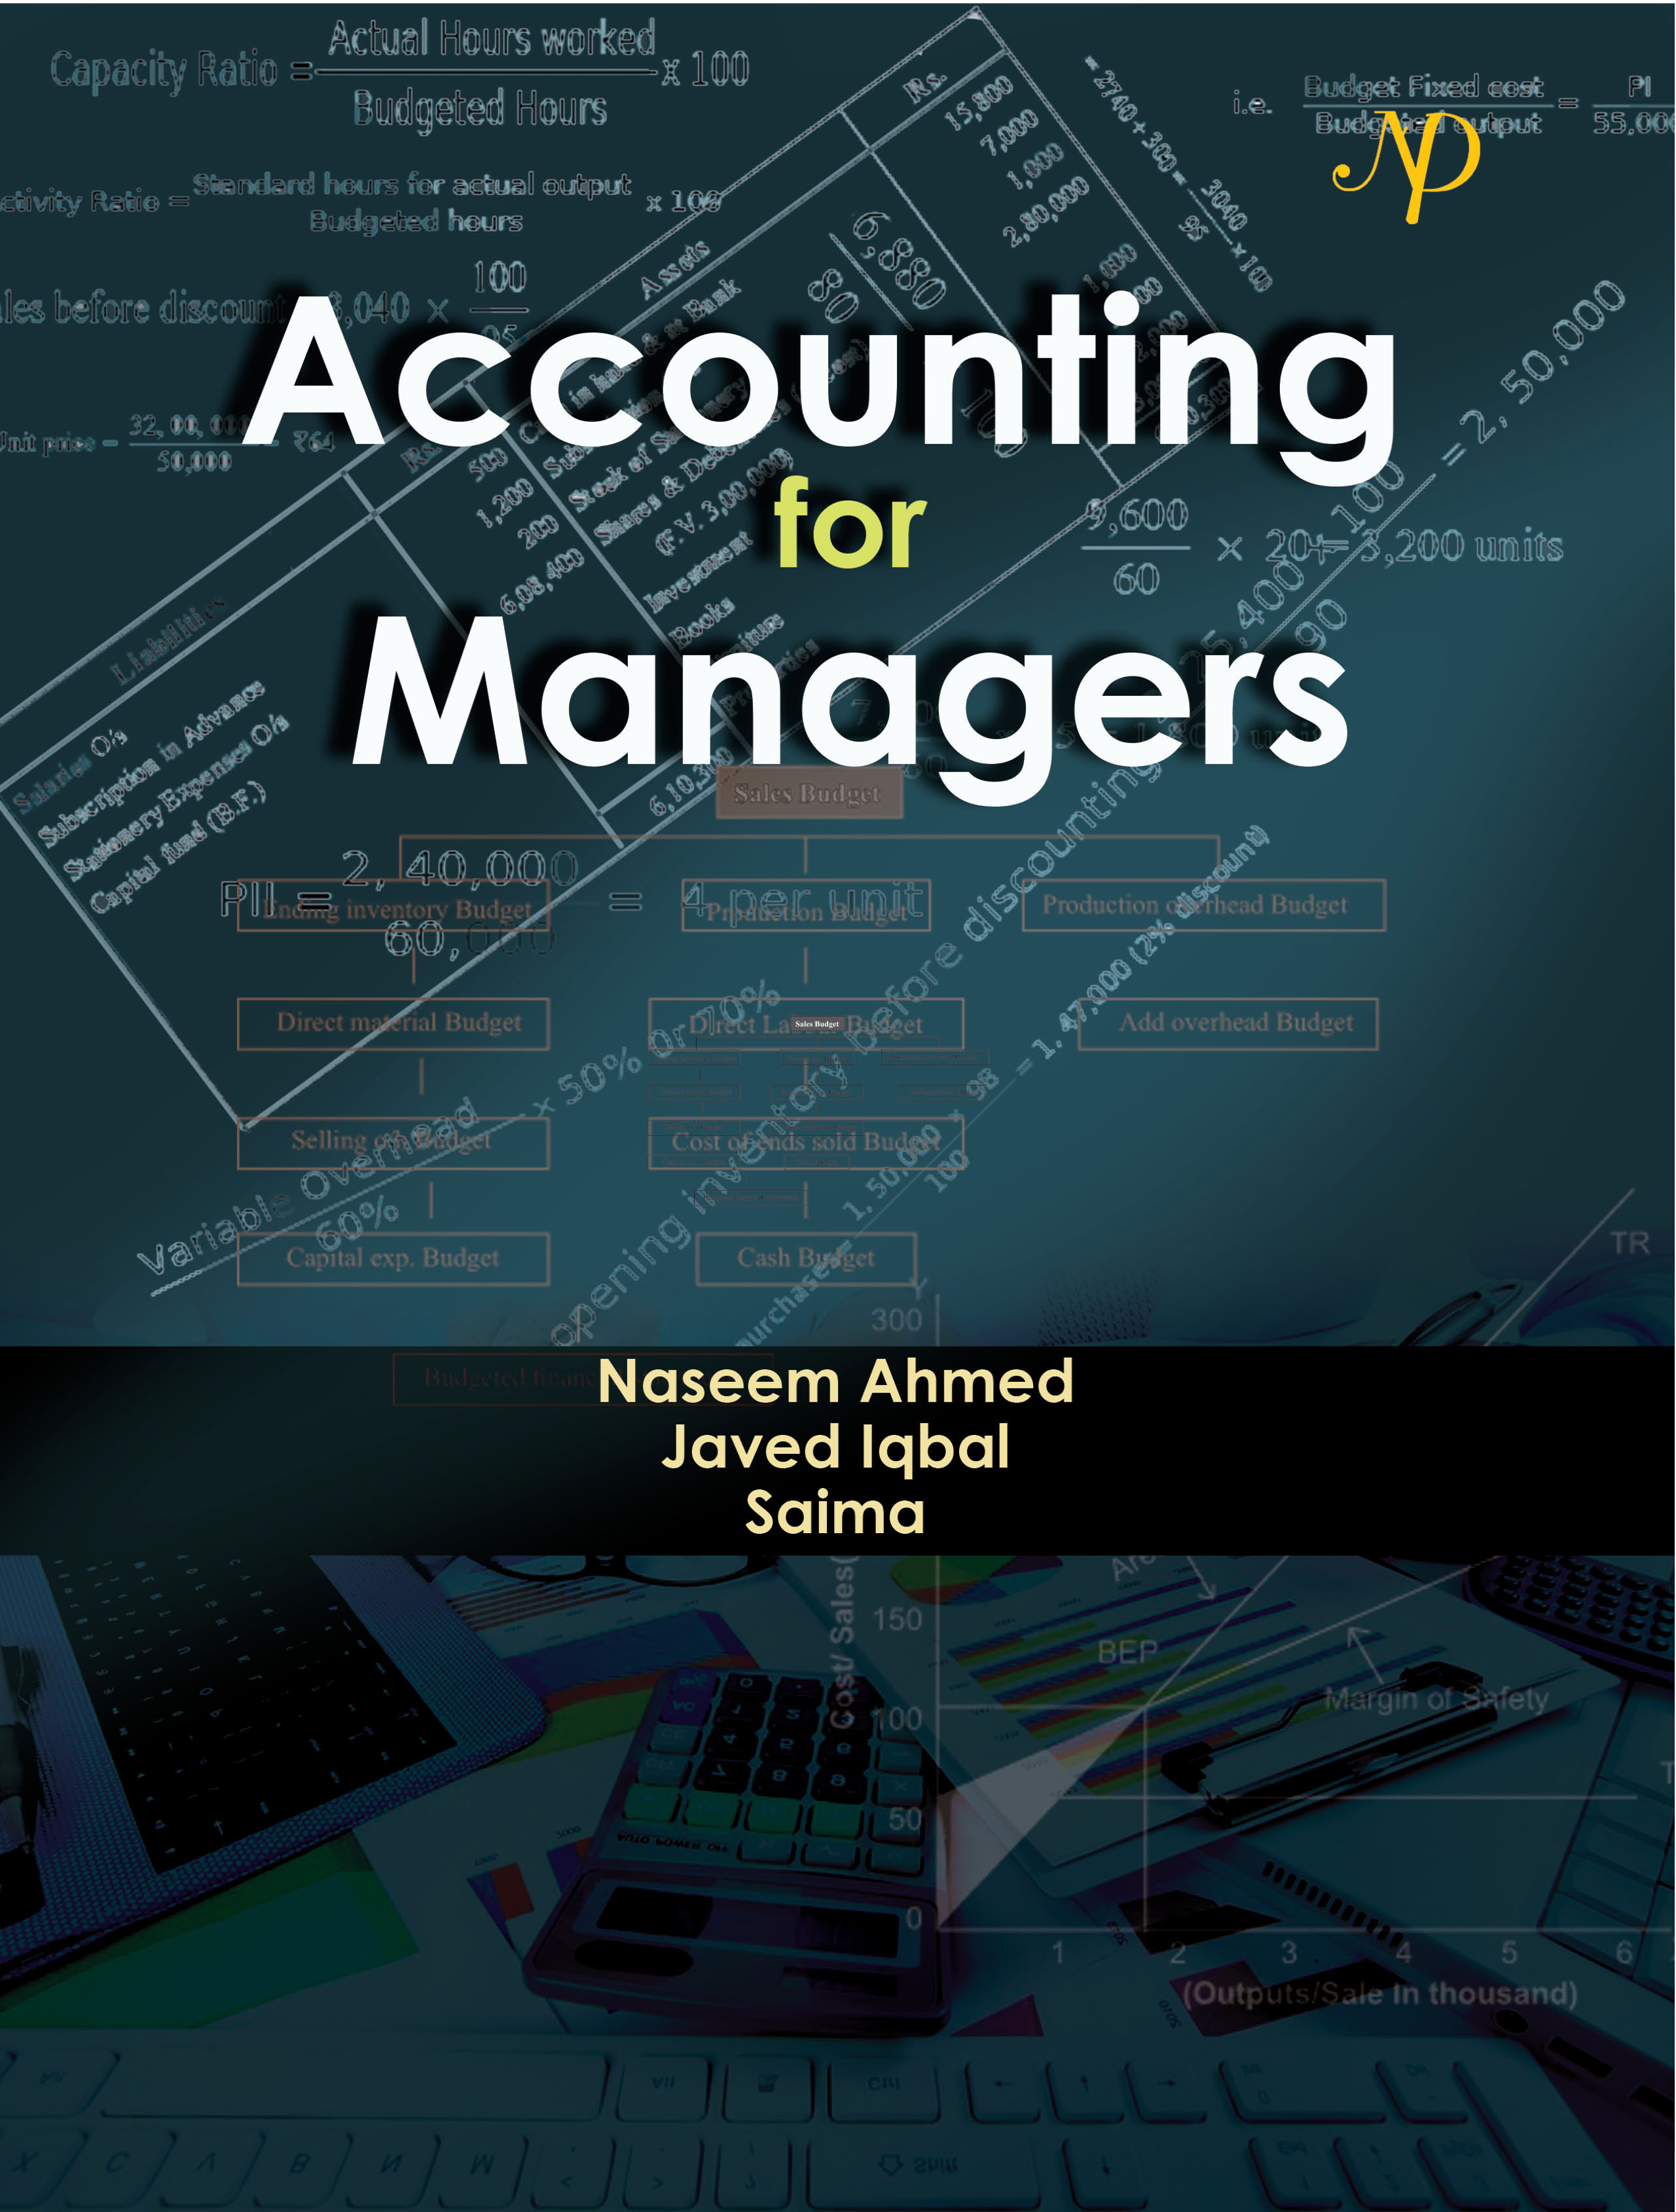 Accounting For Managers Cover final.jpg